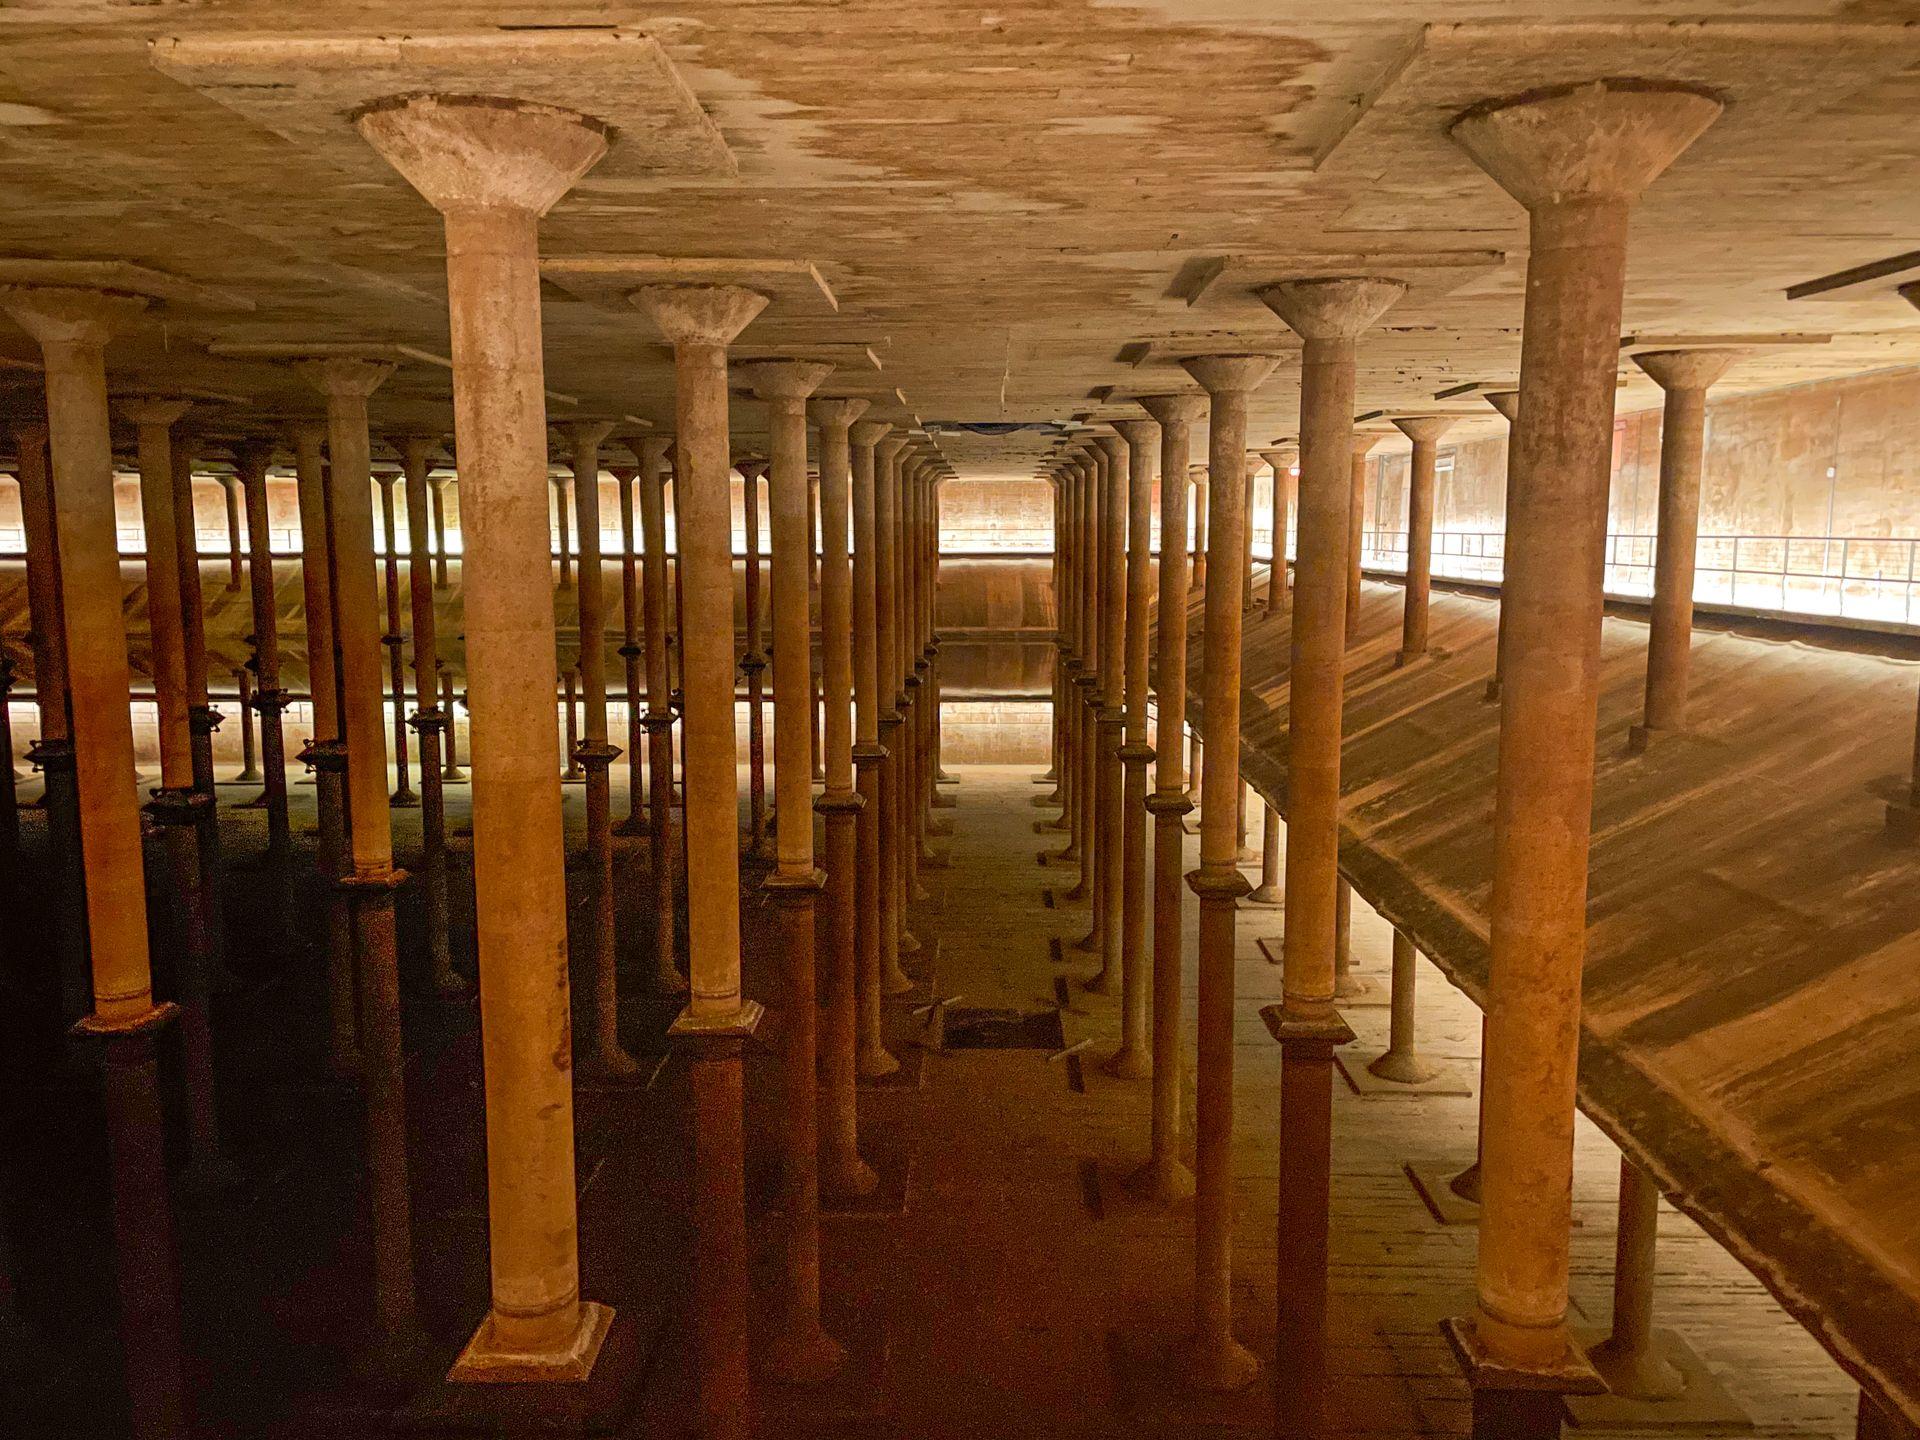 Looking out at part of the Buffalo Bayou Cistern. Columns reflect in the water at the base of the space